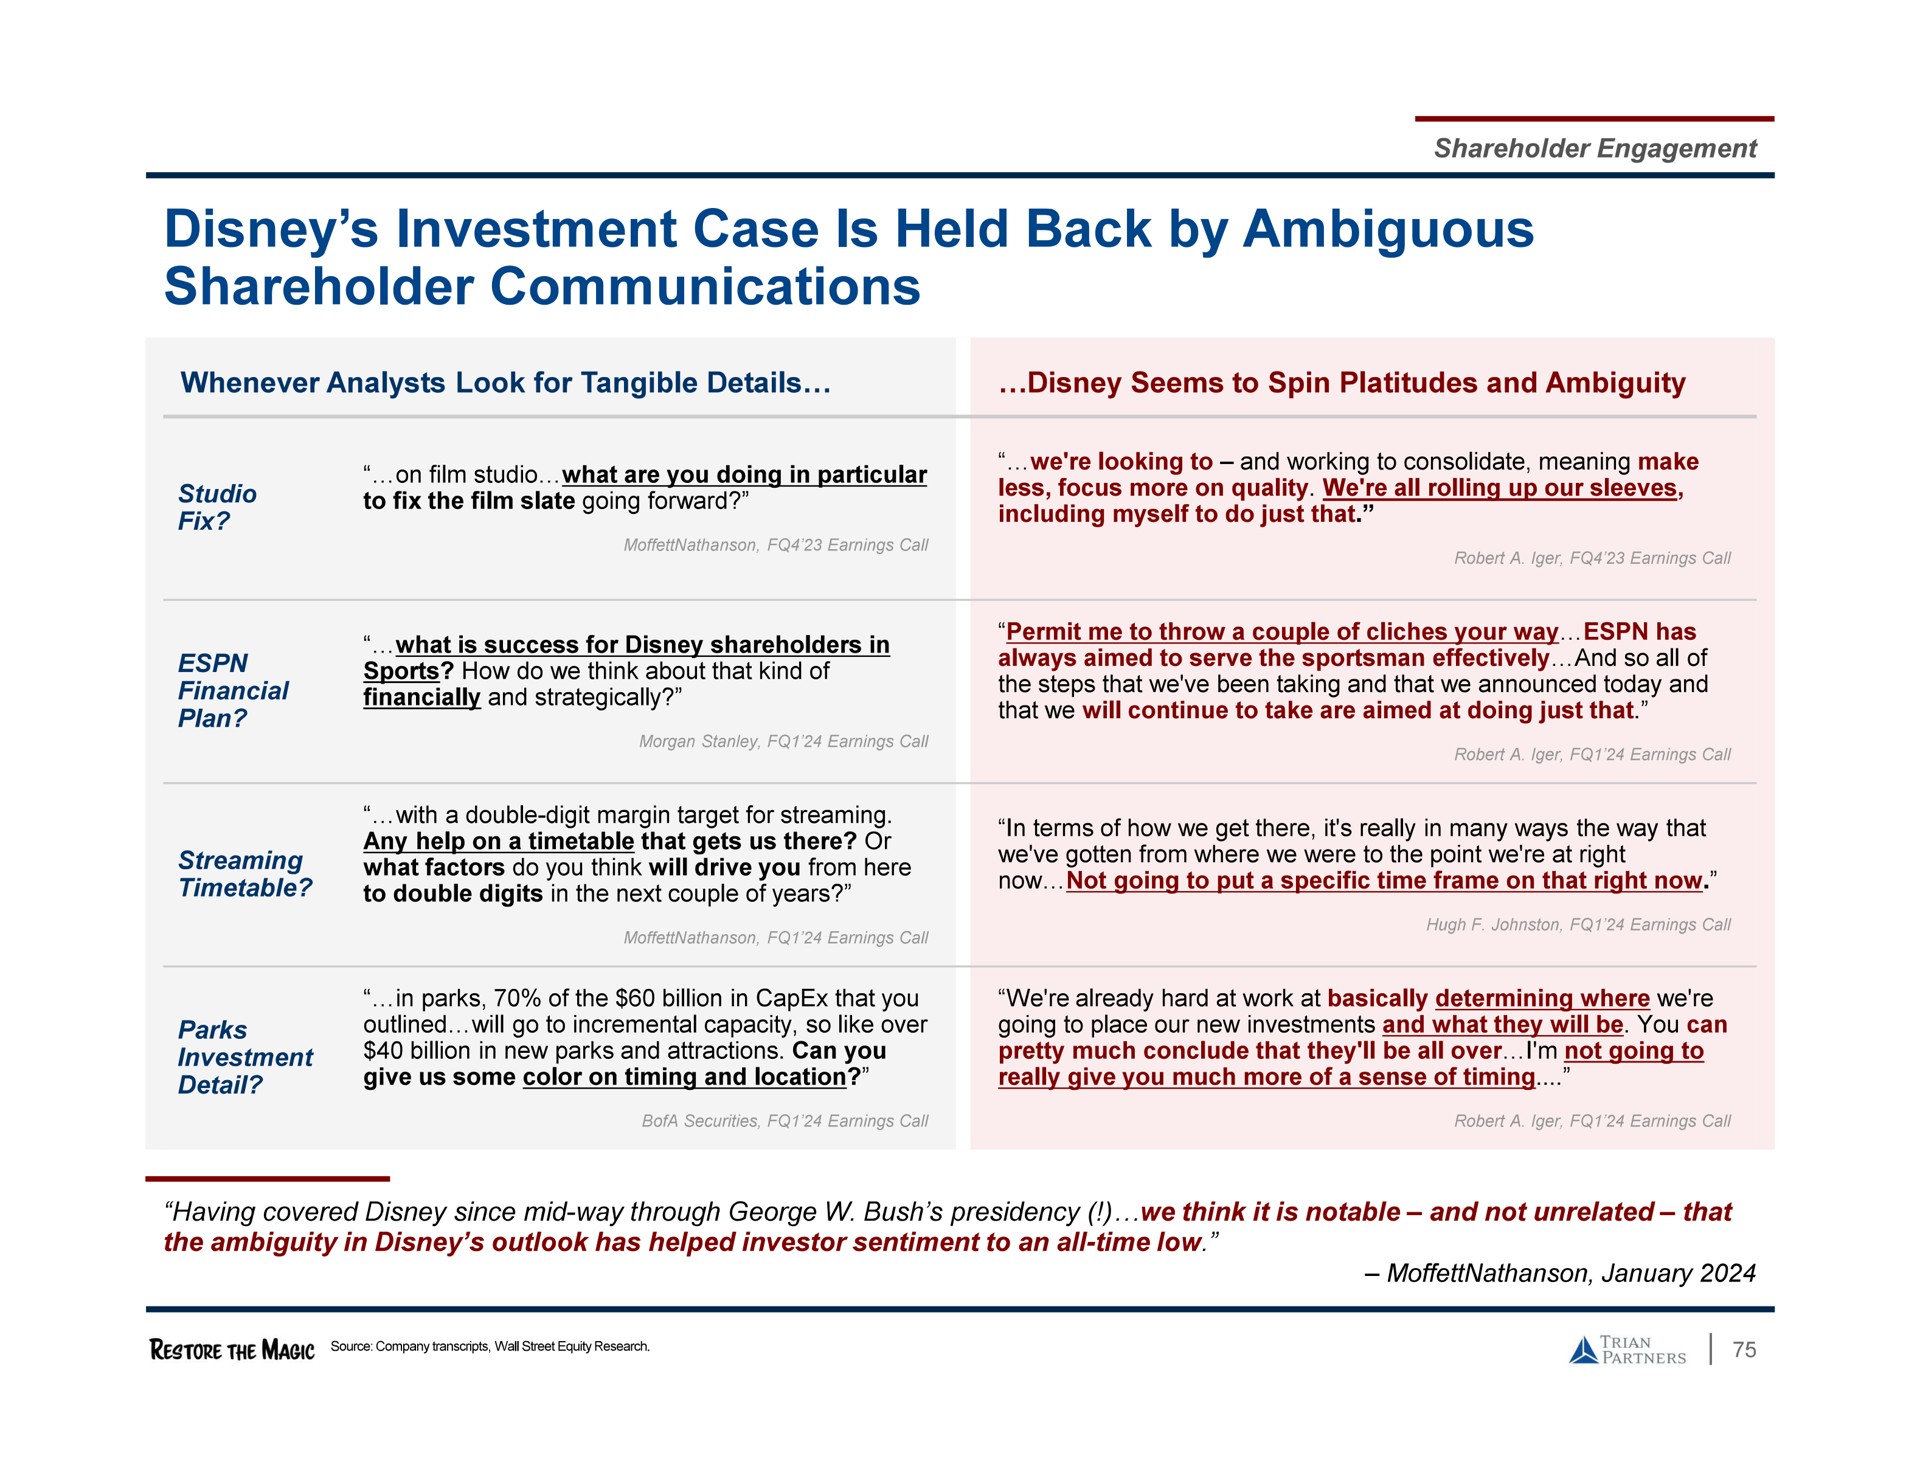 investment case is held back by ambiguous shareholder communications | Trian Partners